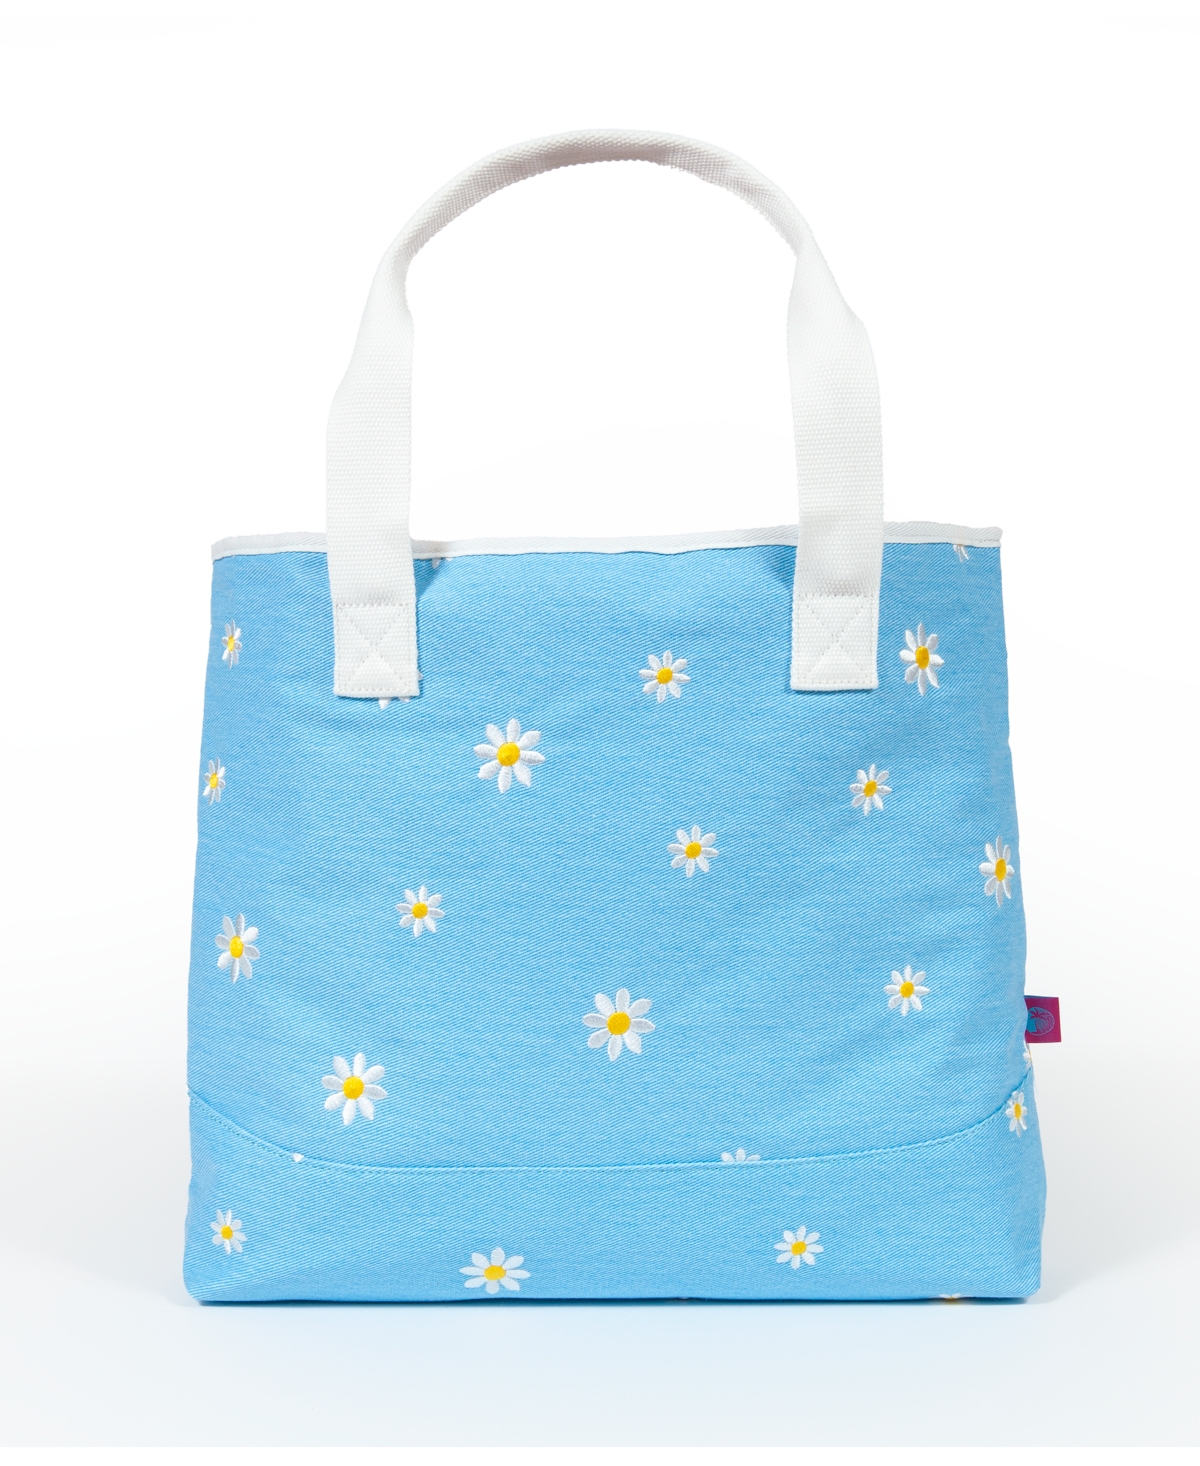 Shady Lady Daisy Extra Large, 100% Cotton Canvas Carryall Tote Bag In Blue